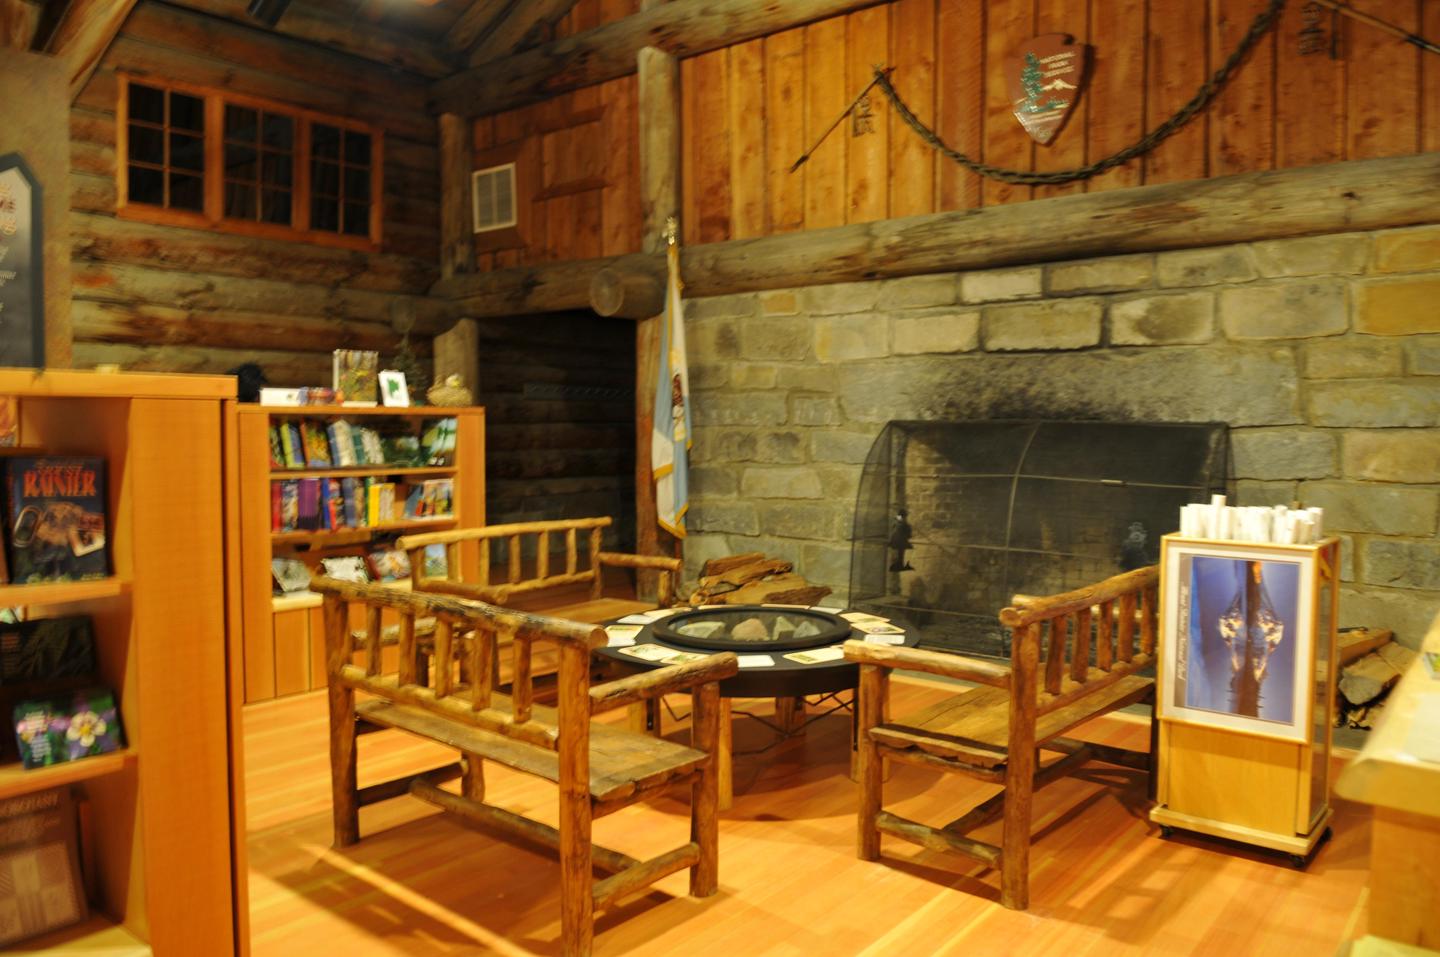 Sunrise Visitor Center FireplaceEnjoy the rustic building and massive fireplace while browsing the bookstore or relaxing on a bench.